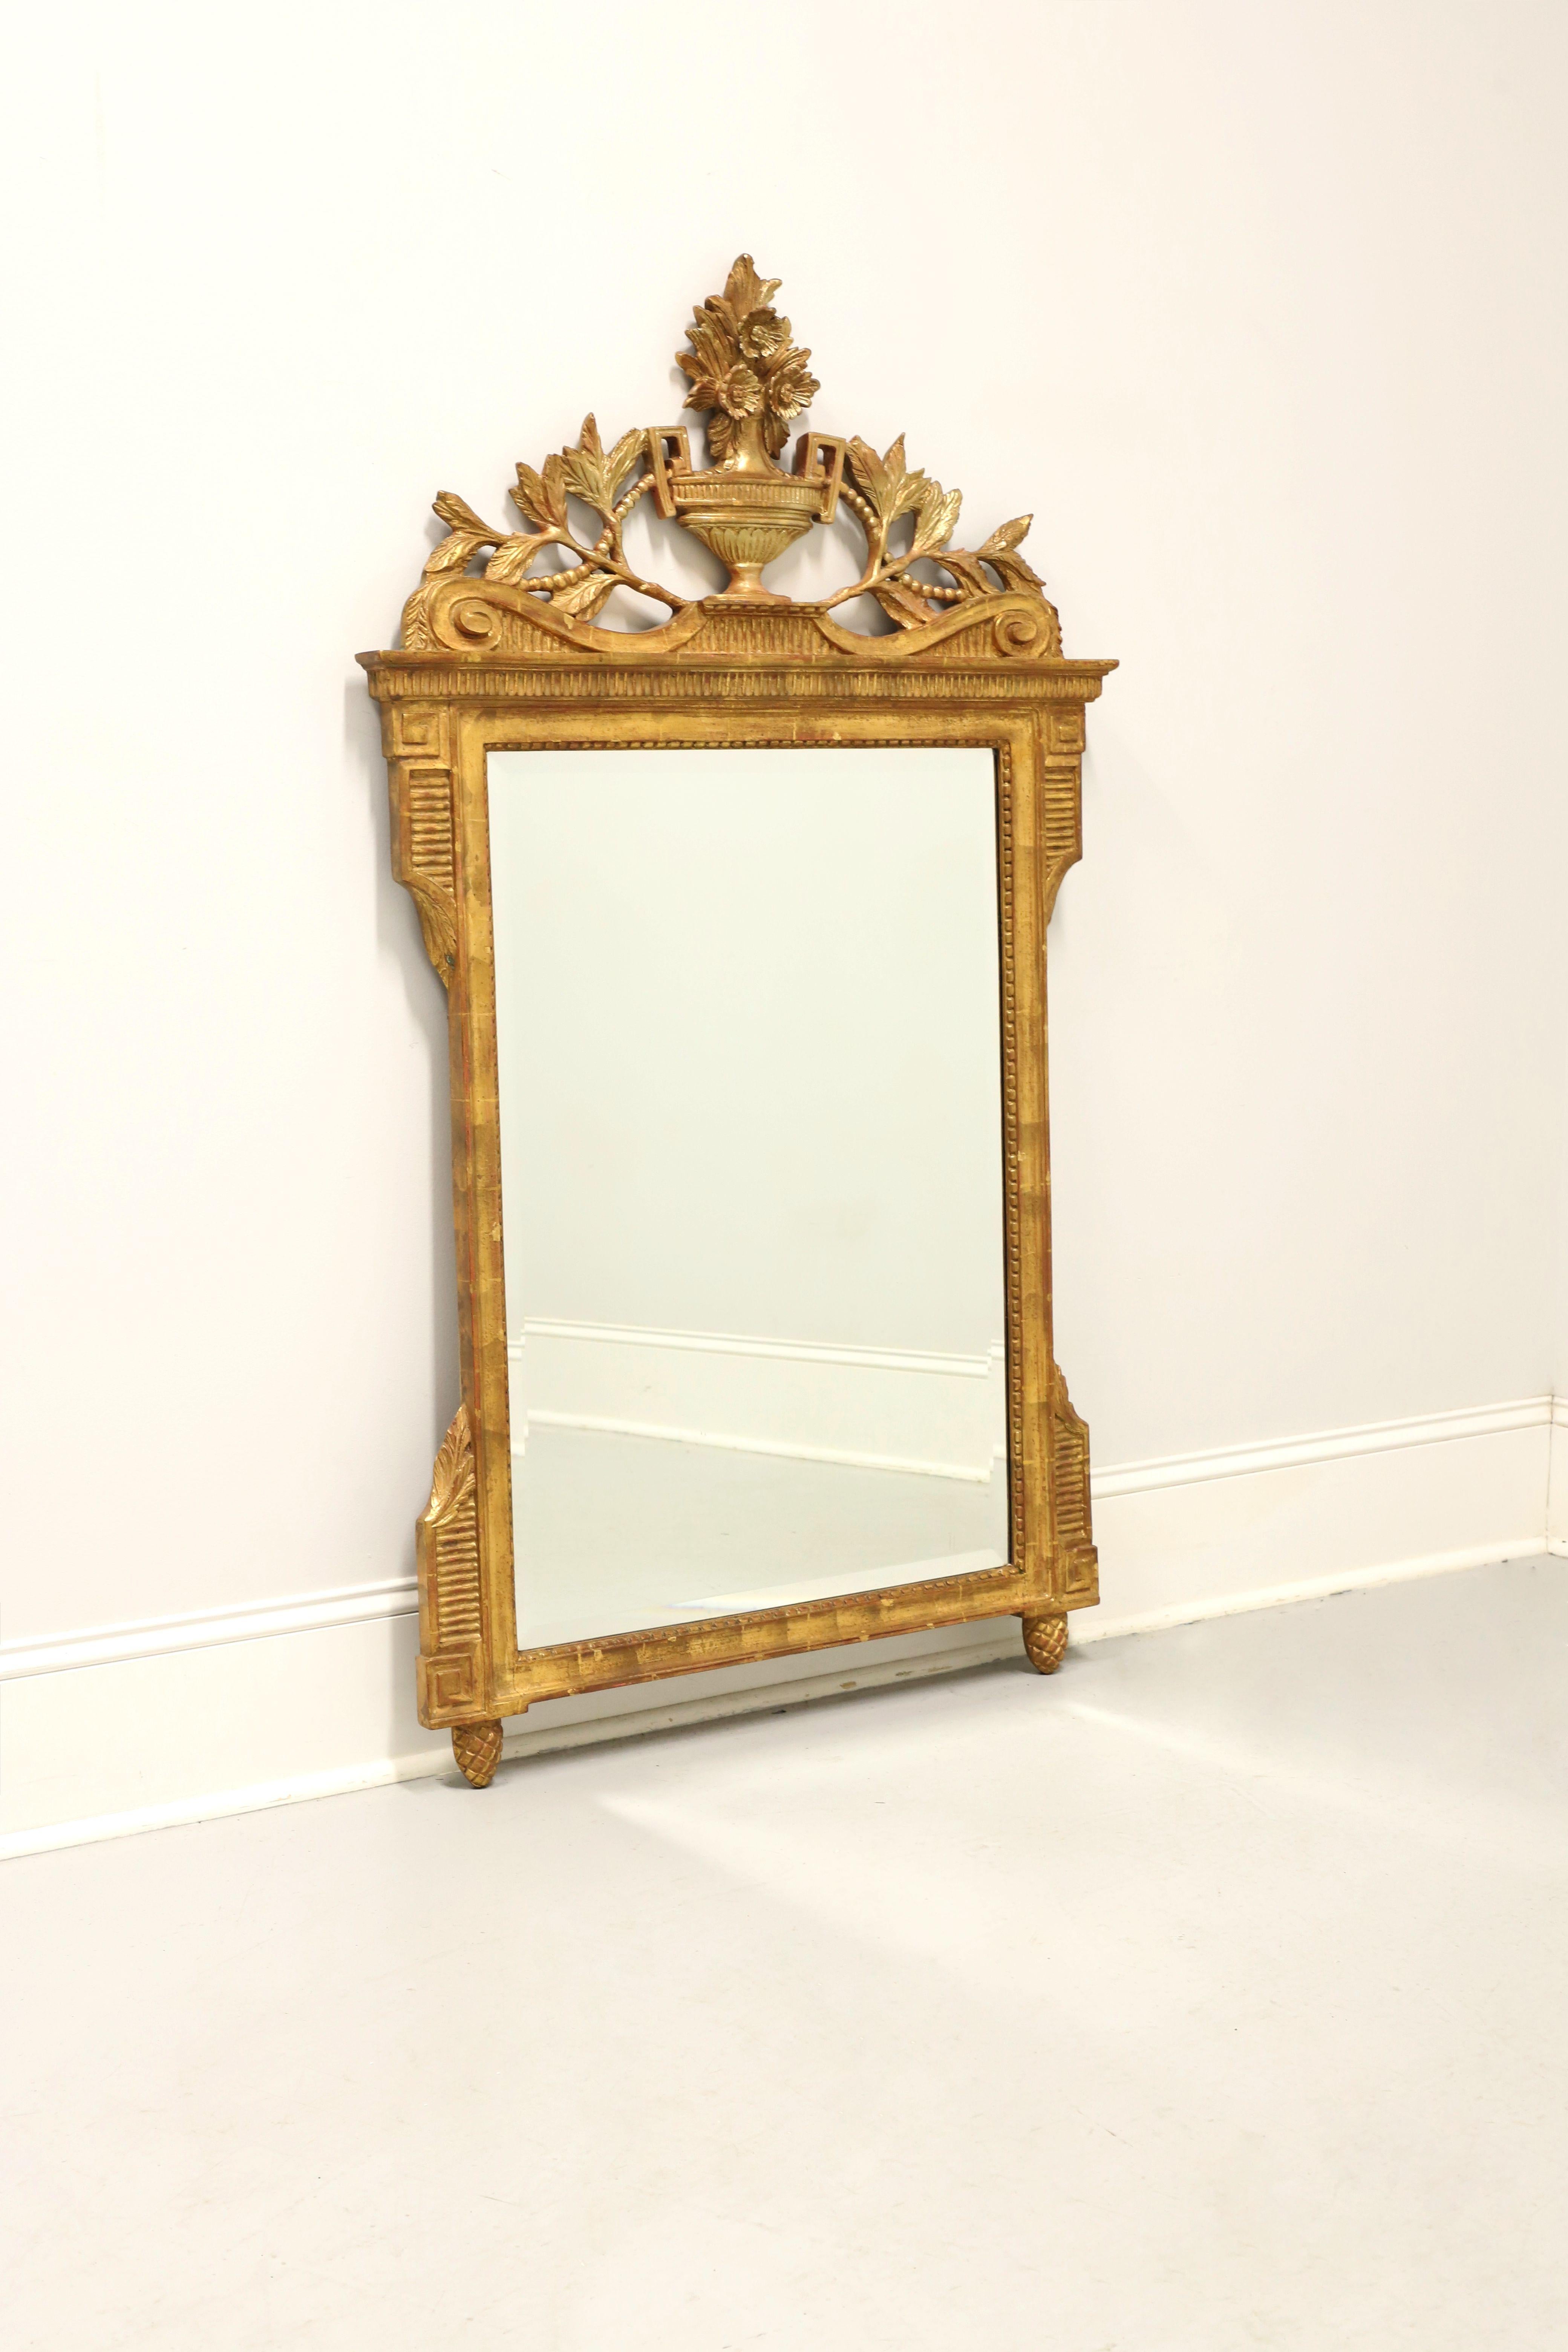 A Neoclassical style wall mirror, unbranded. Beveled mirror glass in an ornate gold gilt composite frame with architectural design elements, wood foliate ornamentation to top, center urn with floral motif to top center, and pineapple reverse finials